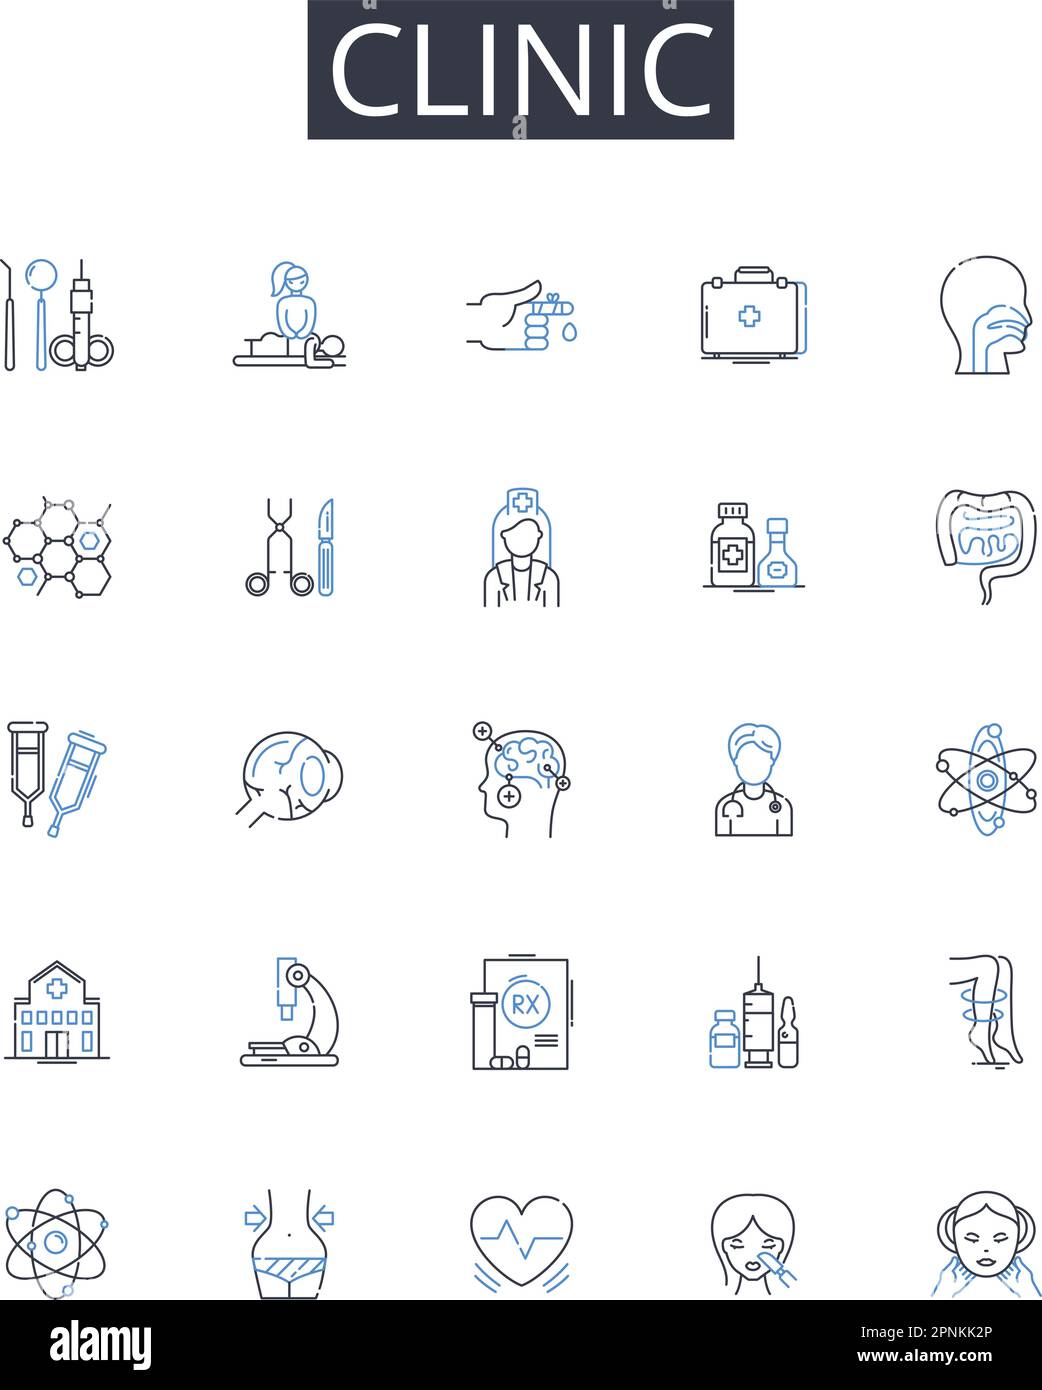 Clinic line icons collection. Hospital, Medical center, Infirmary, Health facility, Doctor's office, Health center, Care center vector and linear Stock Vector